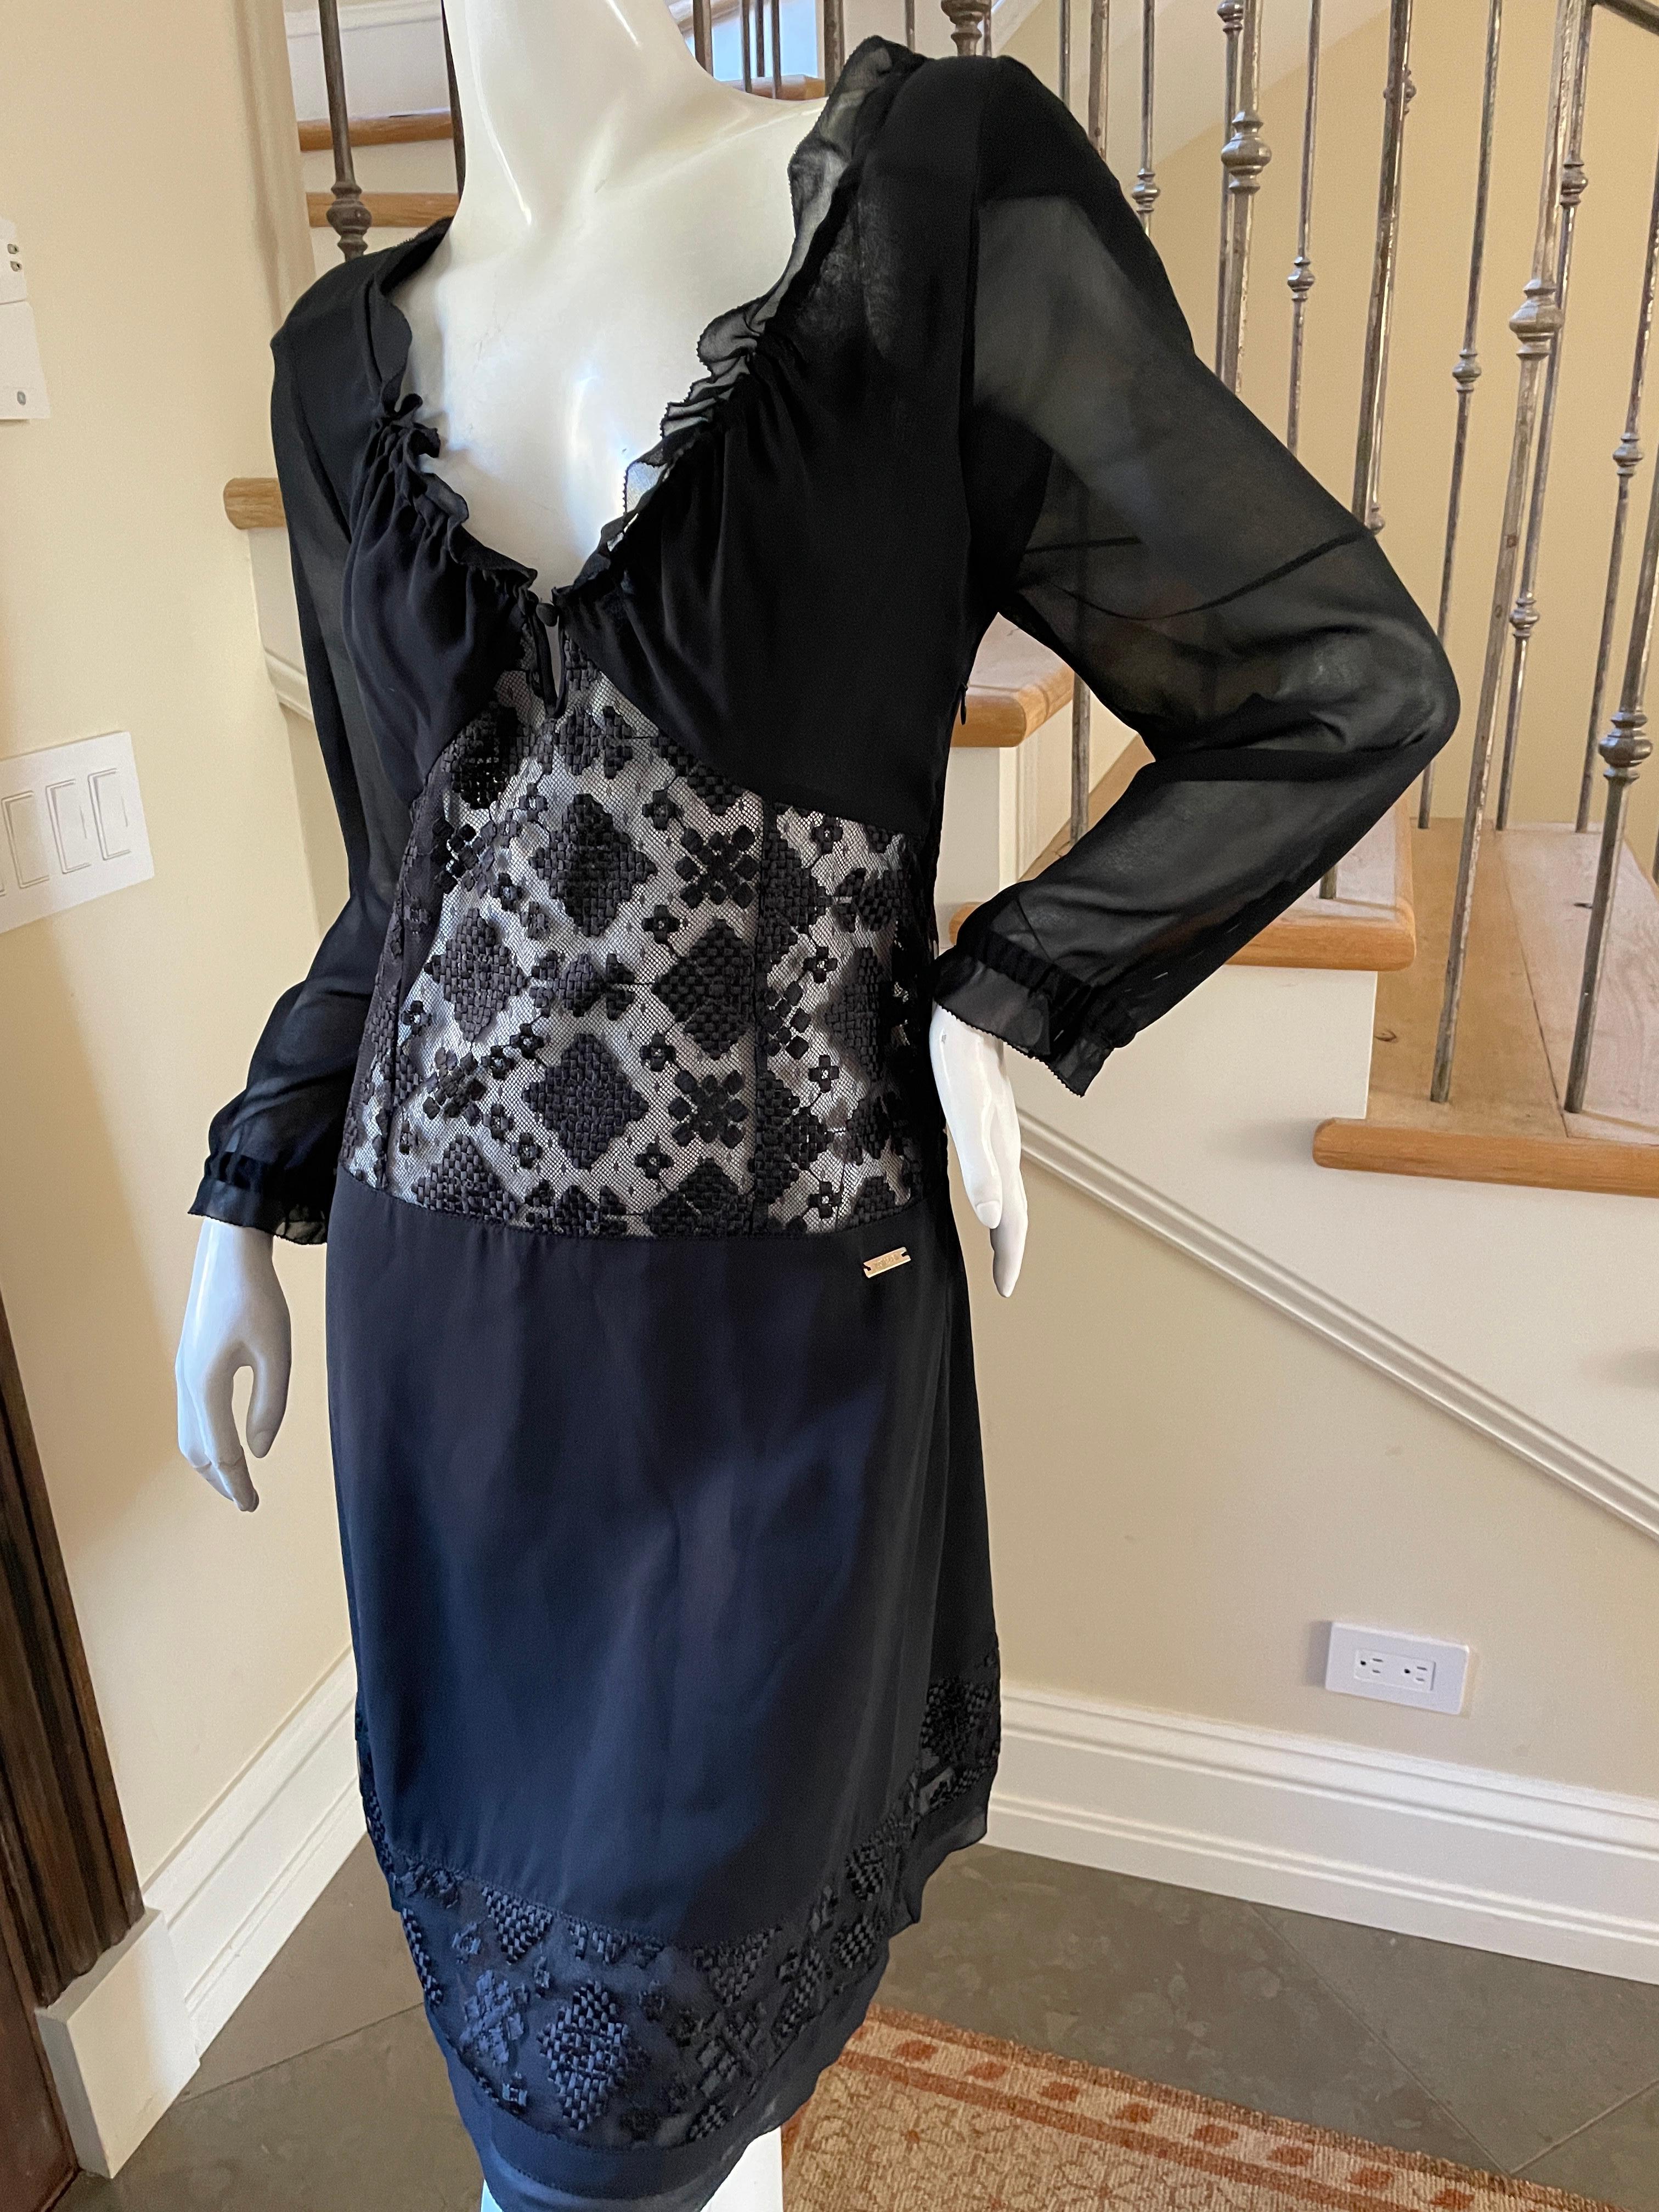 Just Cavalli Little Black Dress by Roberto Cavalli with Sheer Details In Excellent Condition For Sale In Cloverdale, CA